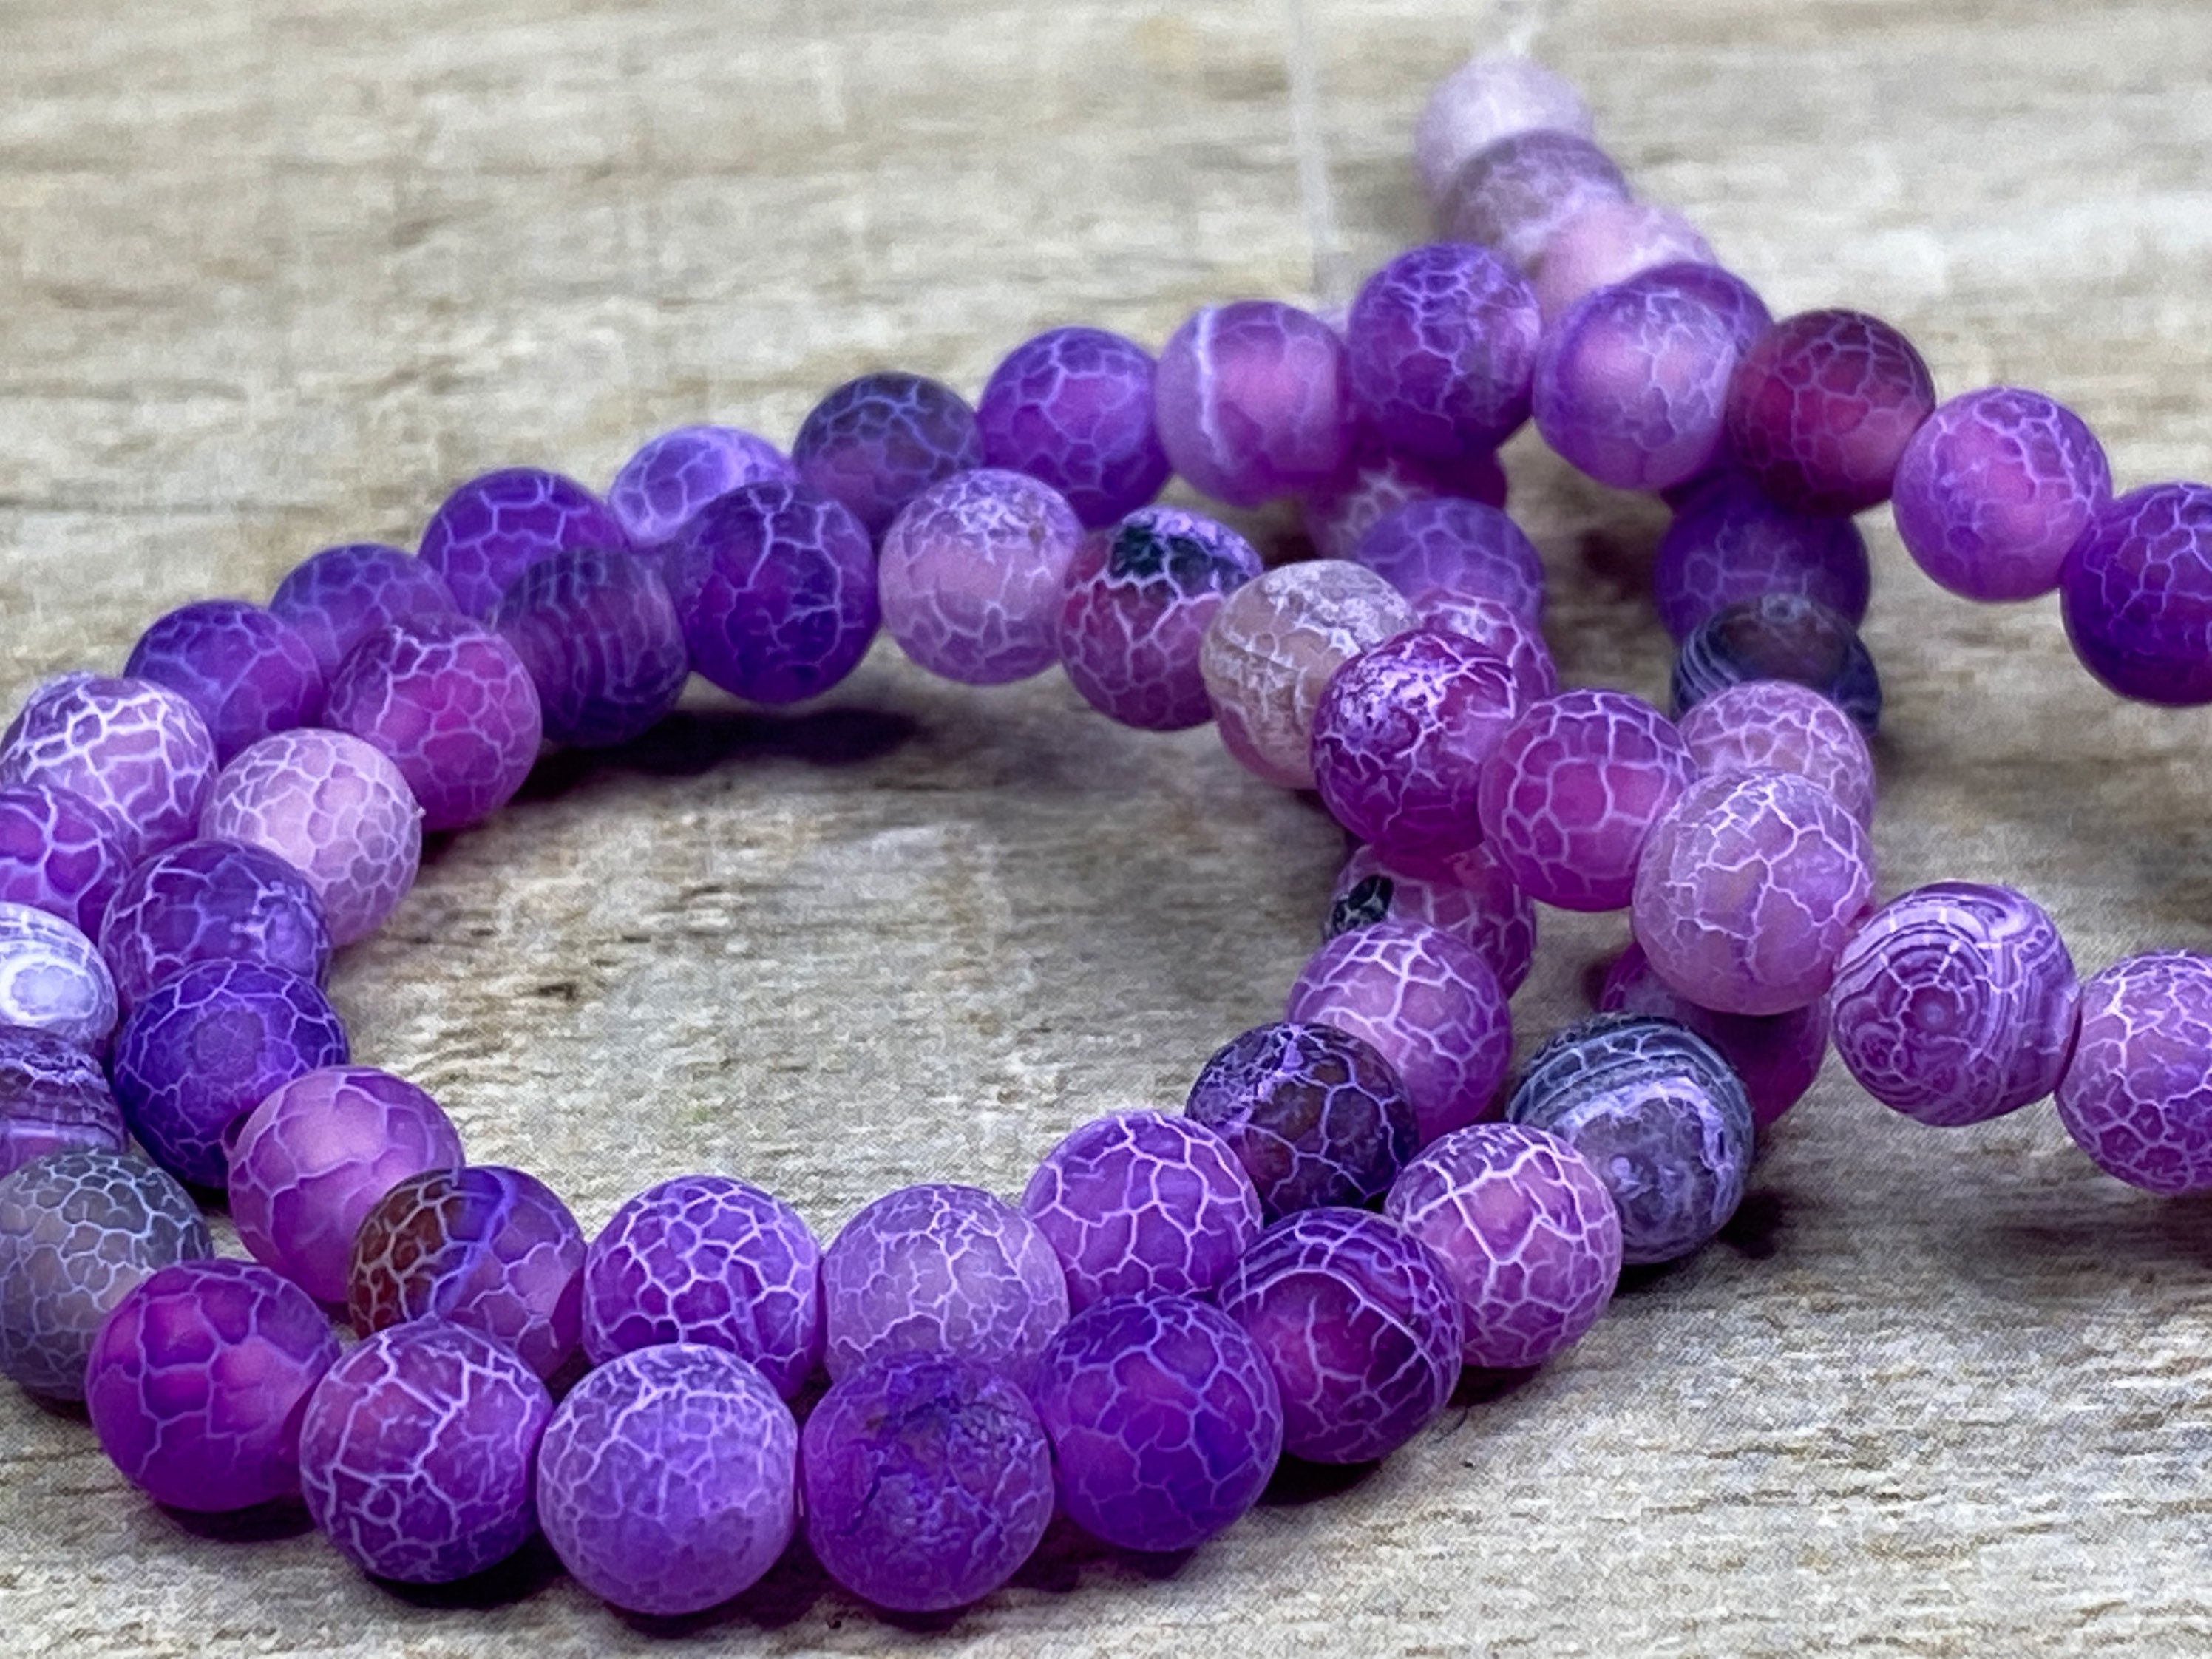 Natural Stone Frost Dark Purple Cracked Dream Fire Dragon Veins Agates  Beads For Jewelry Making DIY Bracelet Necklace Accessories 4/6/8/10/12 Mm  15 In